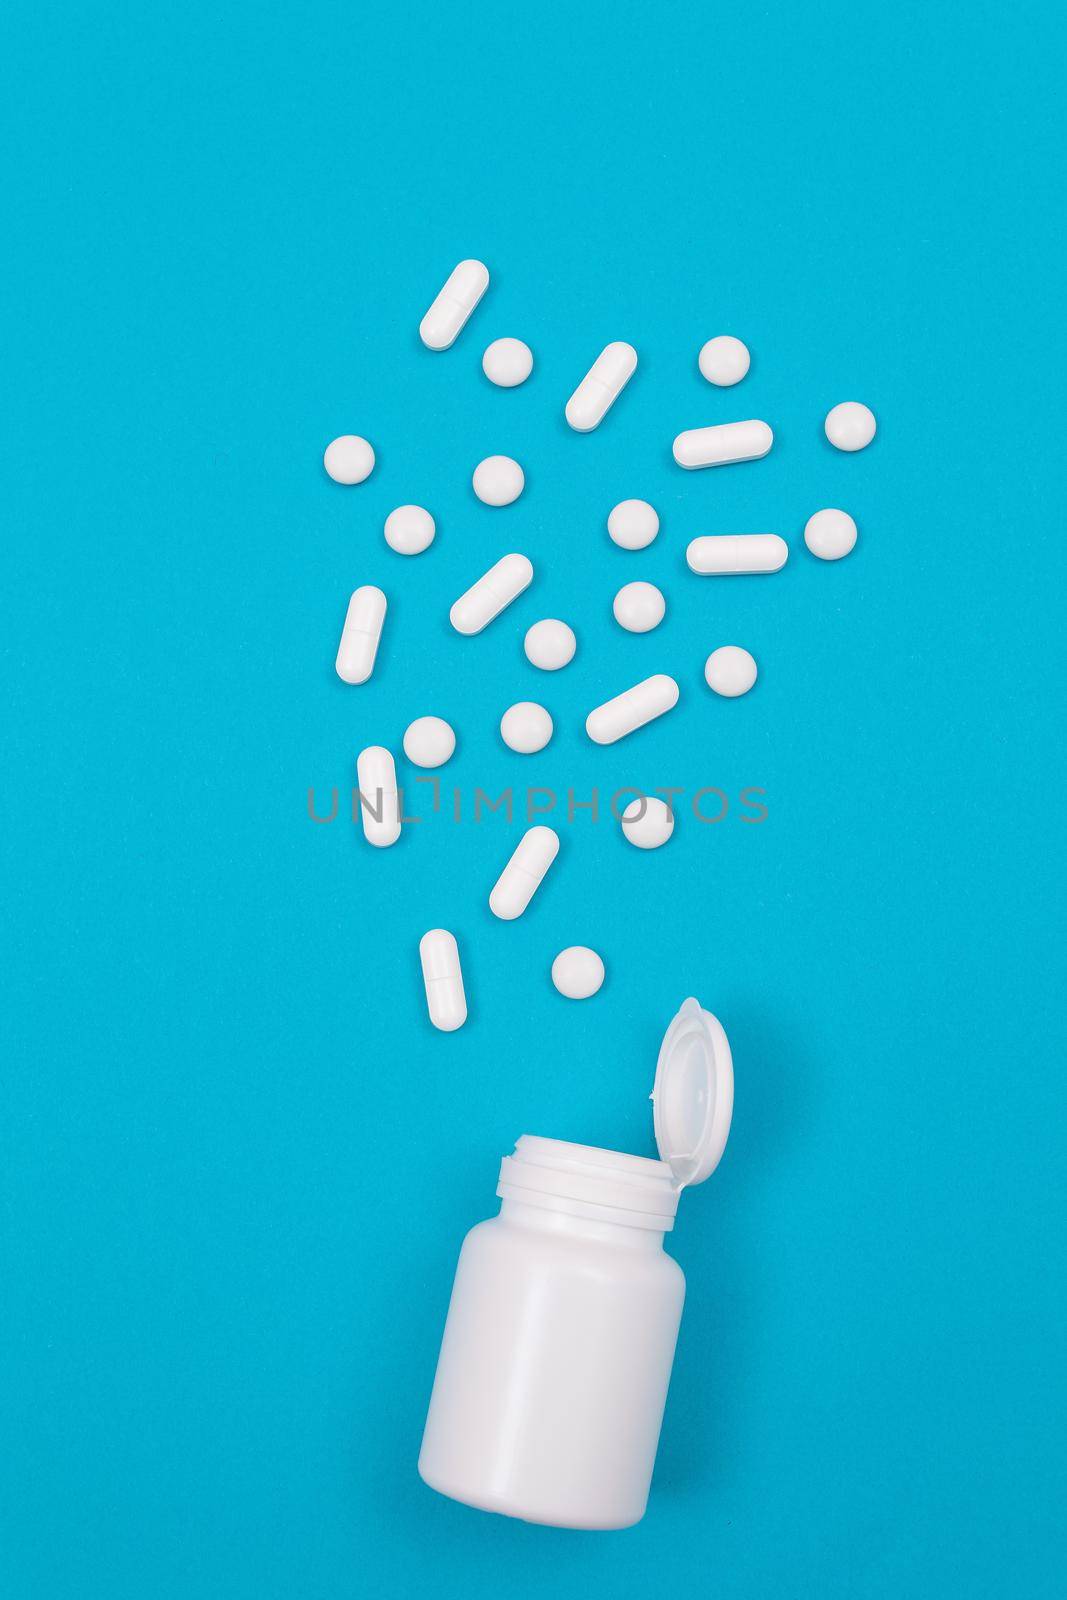 Global Pharmaceutical Industry and Medicinal Products - White Pills or Tablets Scattered from the Pill Container, Lying on Blue Background